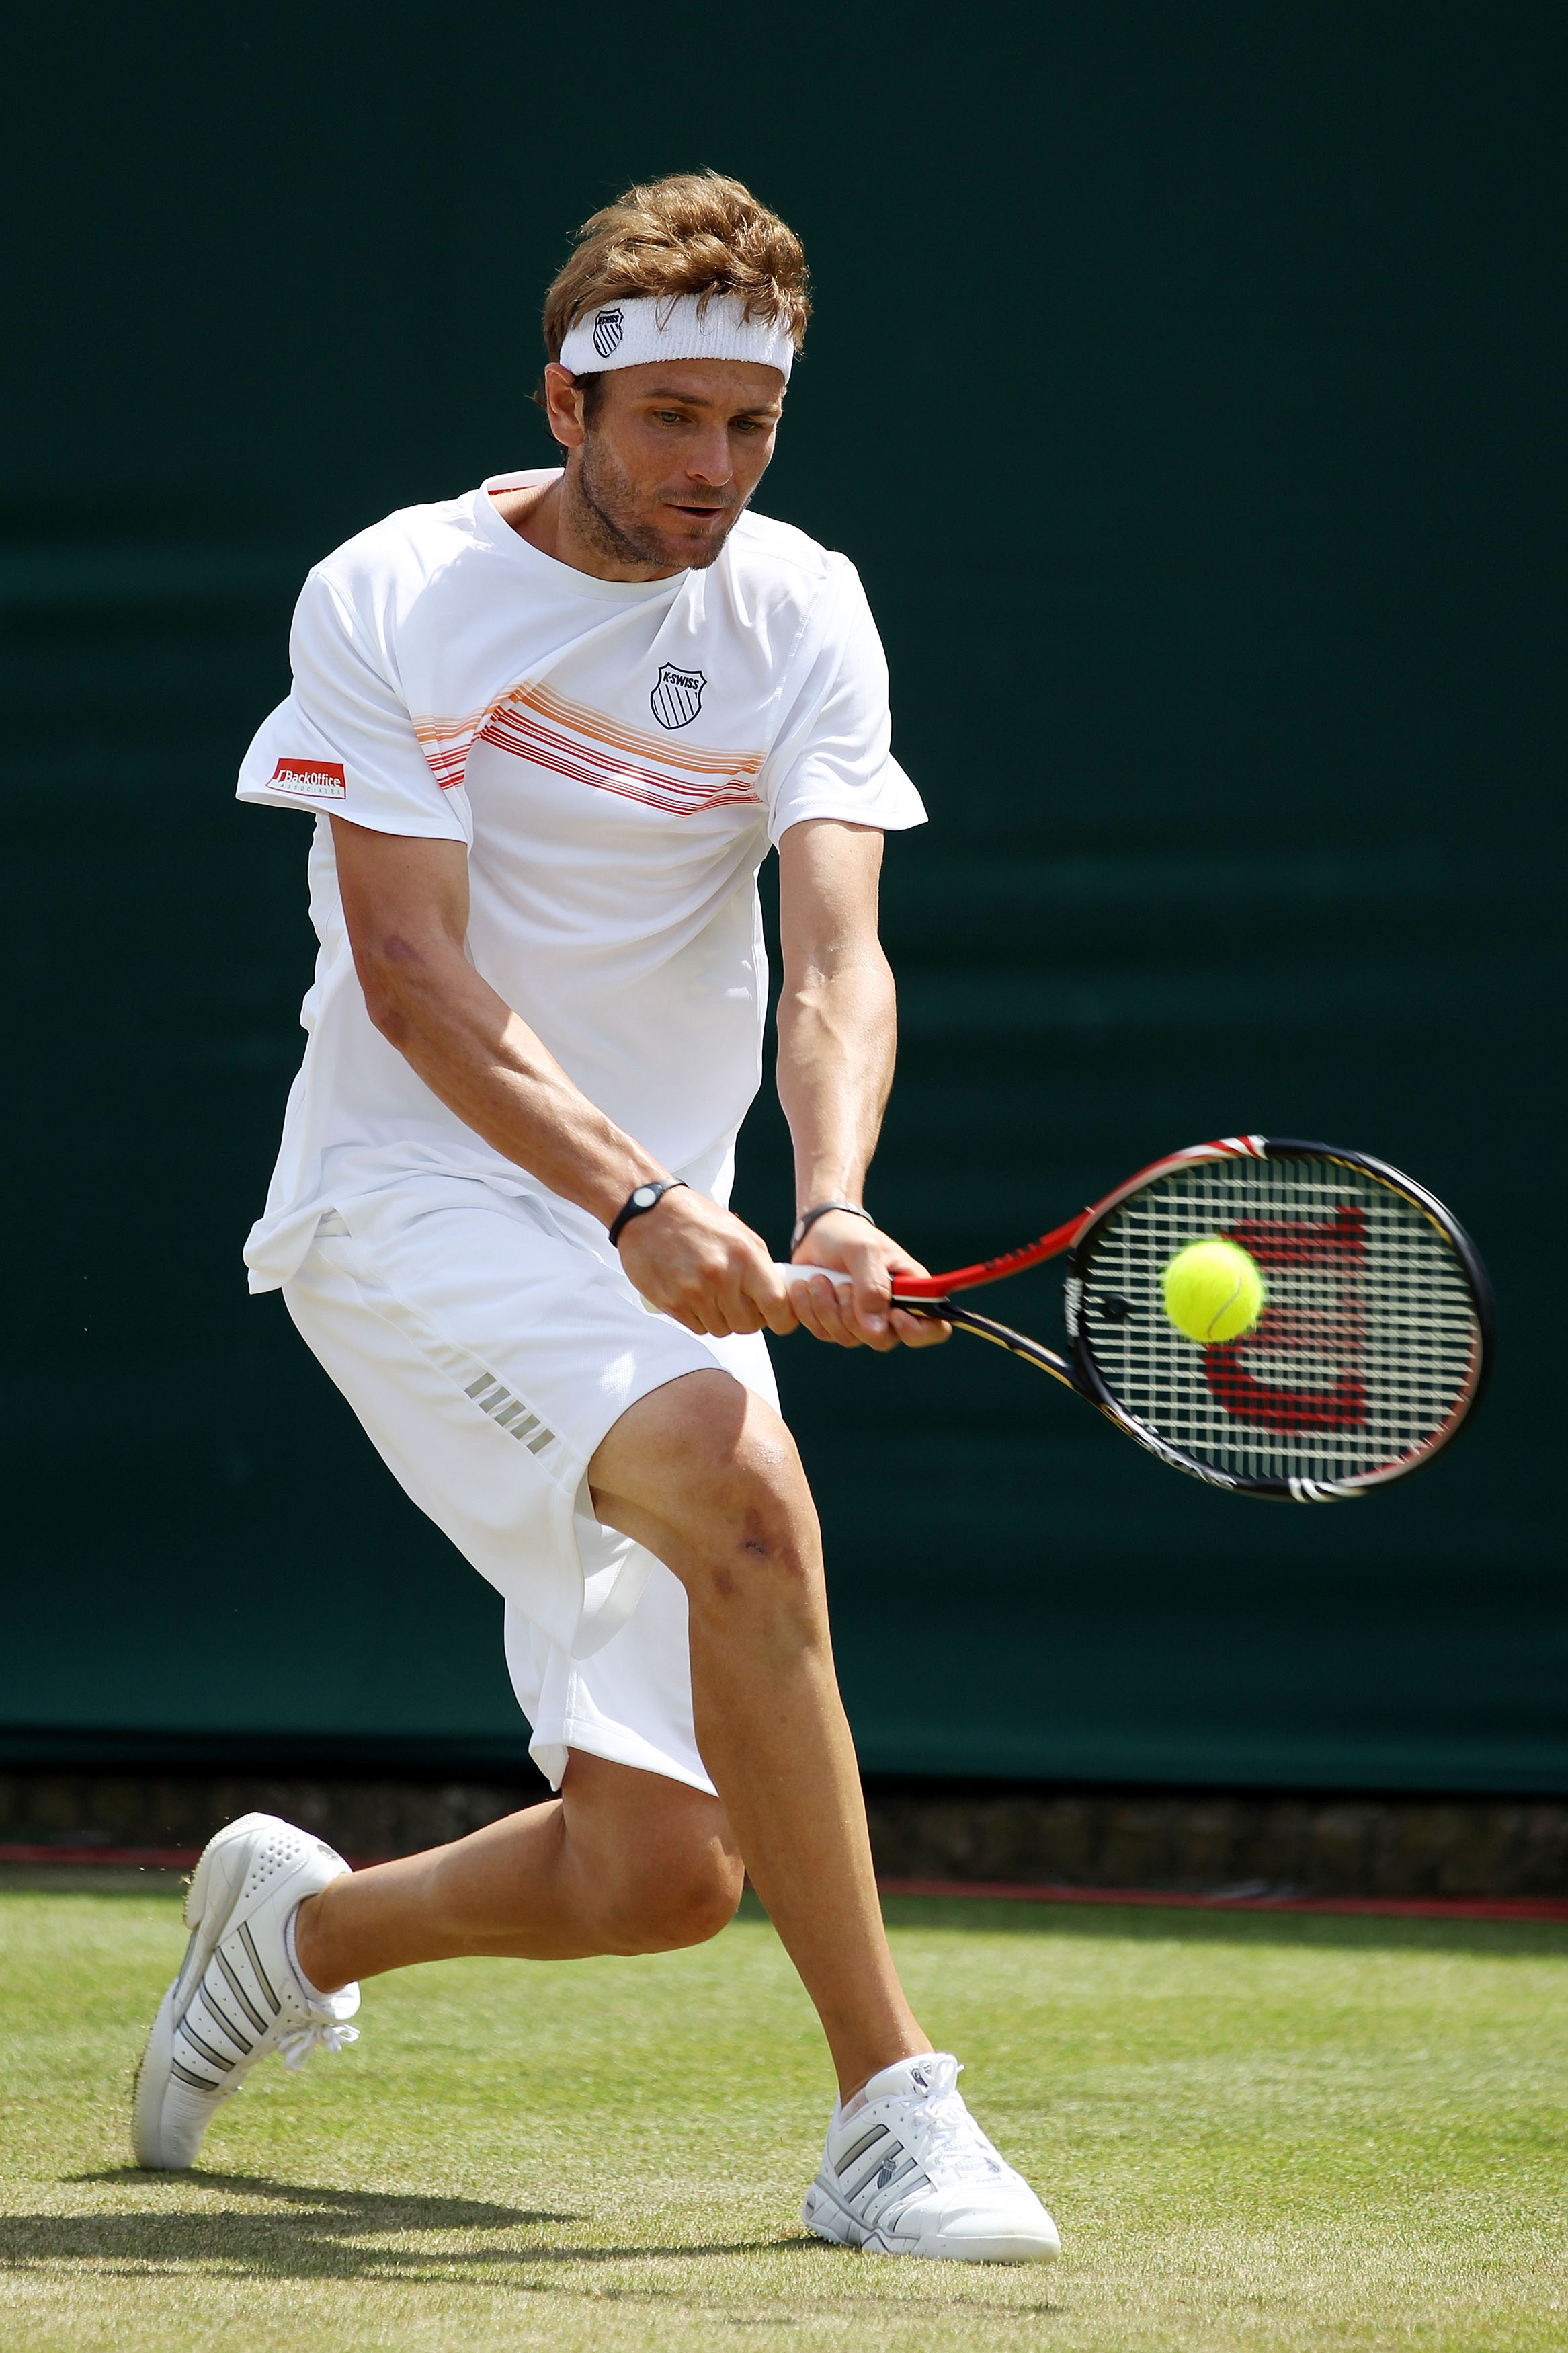 LONDON, ENGLAND - JUNE 23:  Mardy Fish of USA plays a shot during his second round match against Florian Mayer of Germany on Day Three of the Wimbledon Lawn Tennis Championships at the All England Lawn Tennis and Croquet Club on June 23, 2010 in London, E